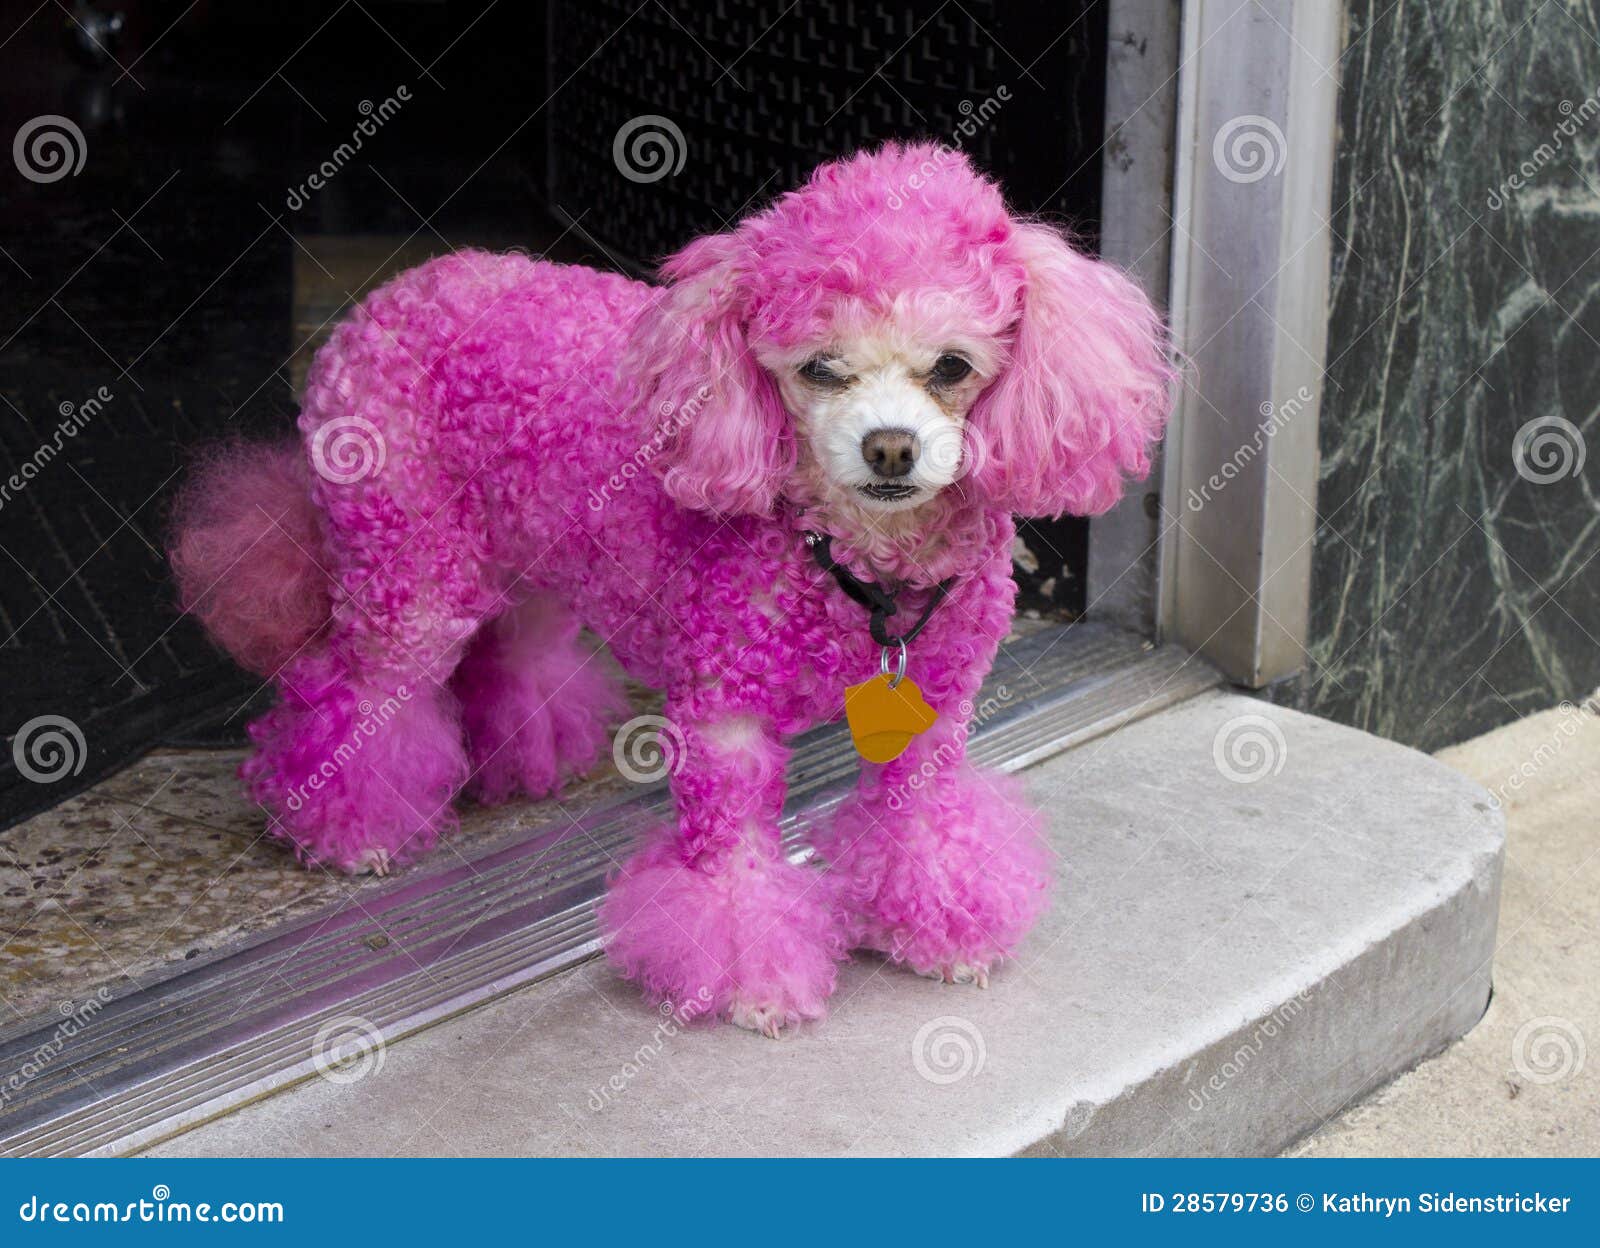 pink poodle toy